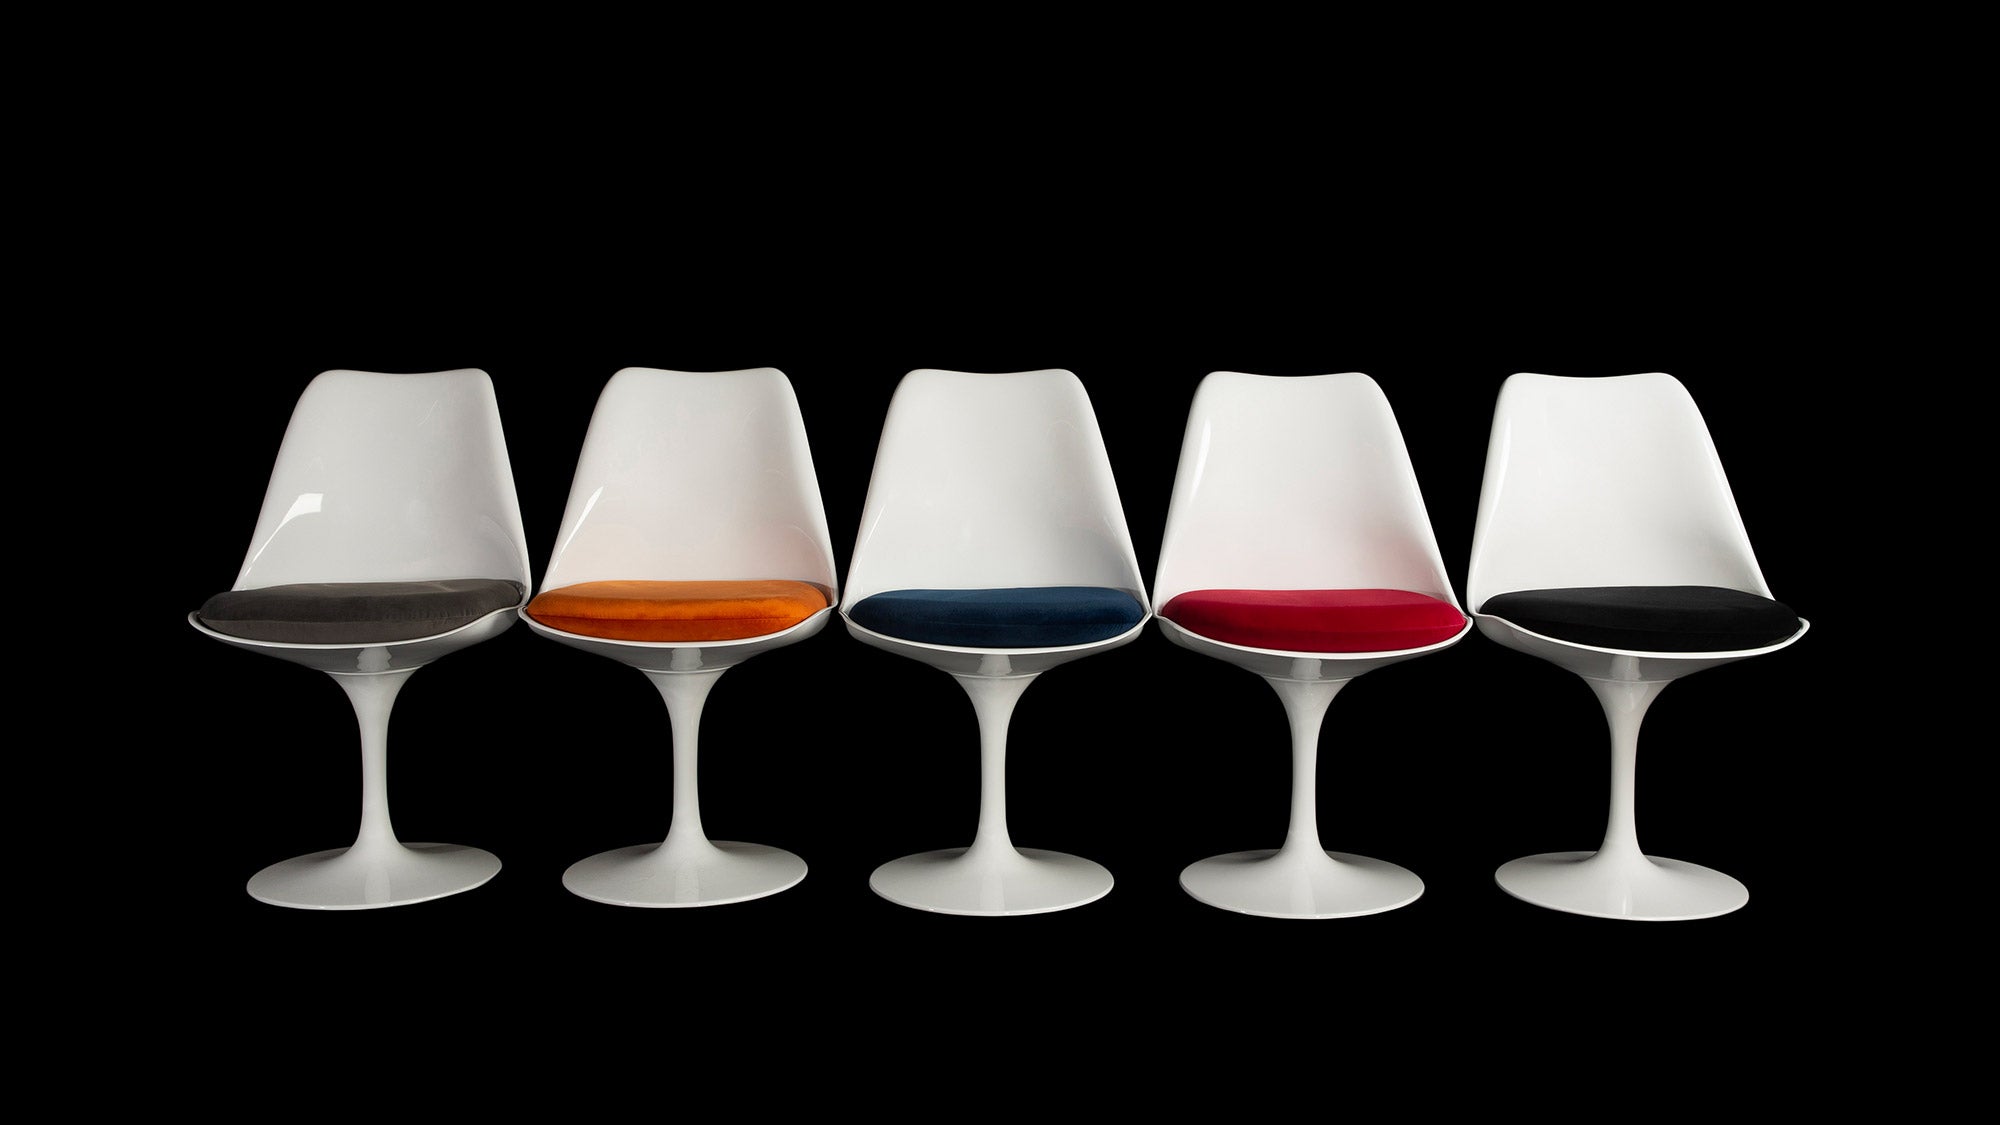 Like ducks in a row, a line of beautiful Eero Saarinen Tulip chairs stand out in white against the black background & each with a different cushion colour